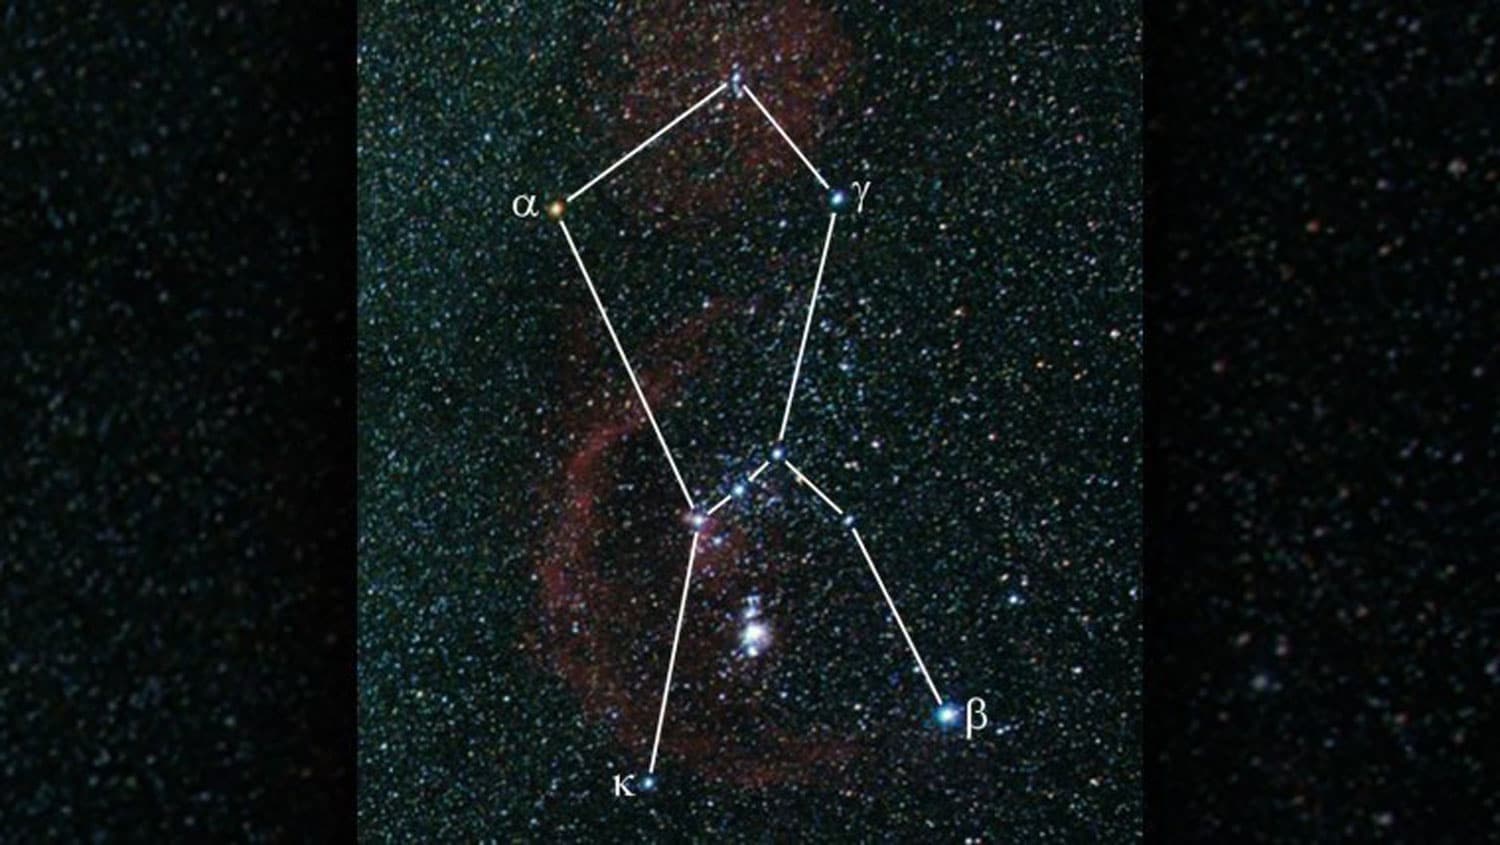 The constellation Orion, Betelgeuse is marked with Alpha